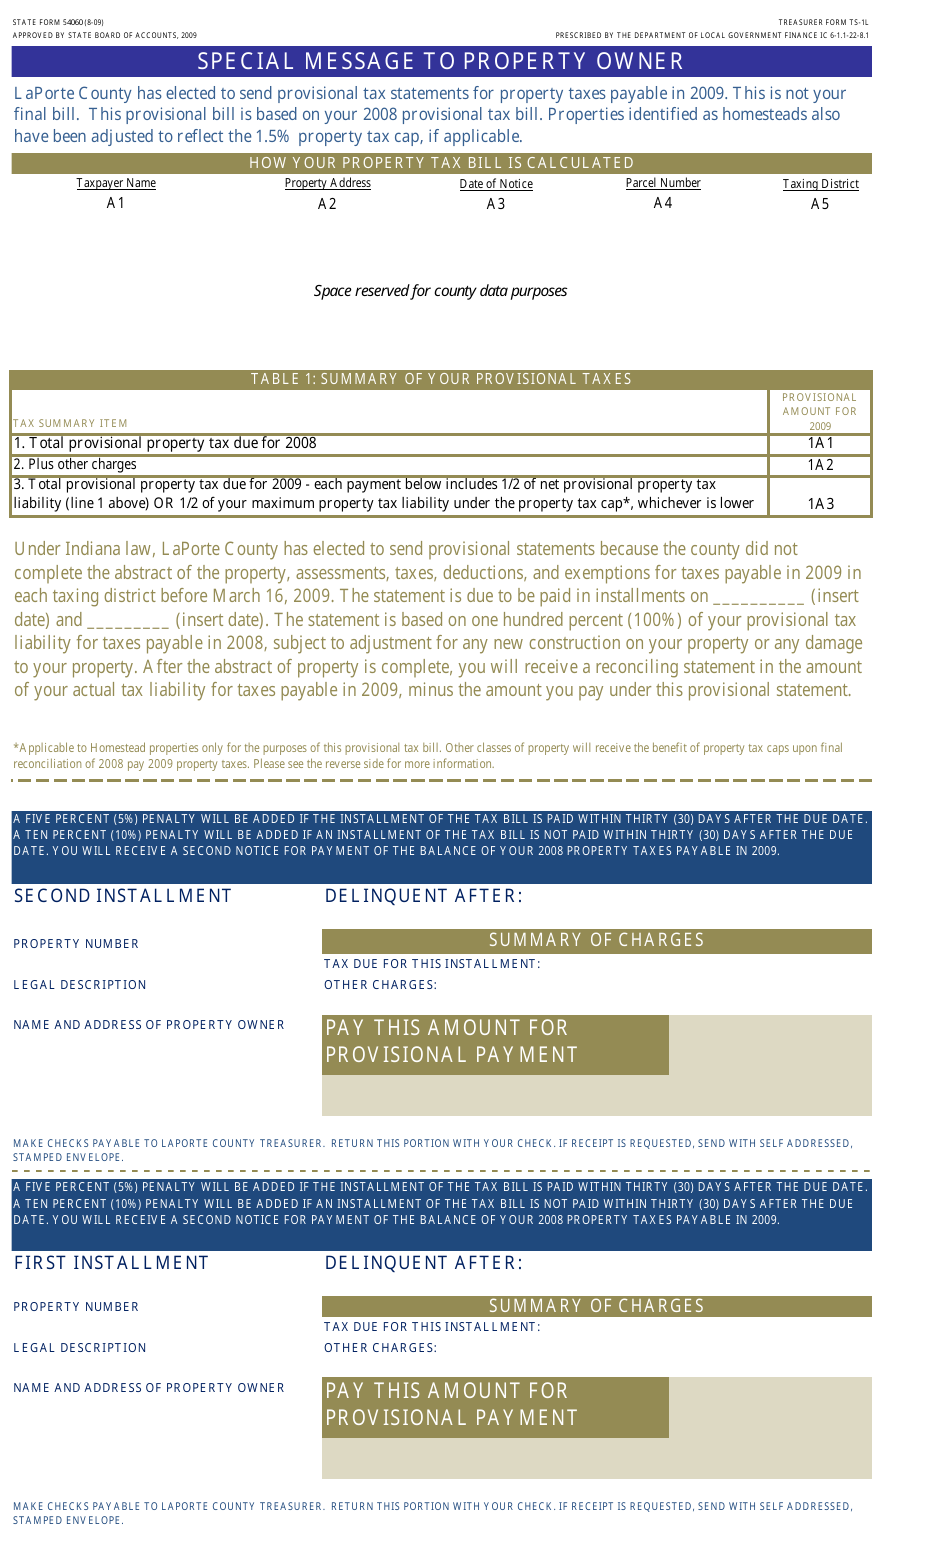 Form TS-1L (State Form 54060) Tax Statement - Indiana, Page 1